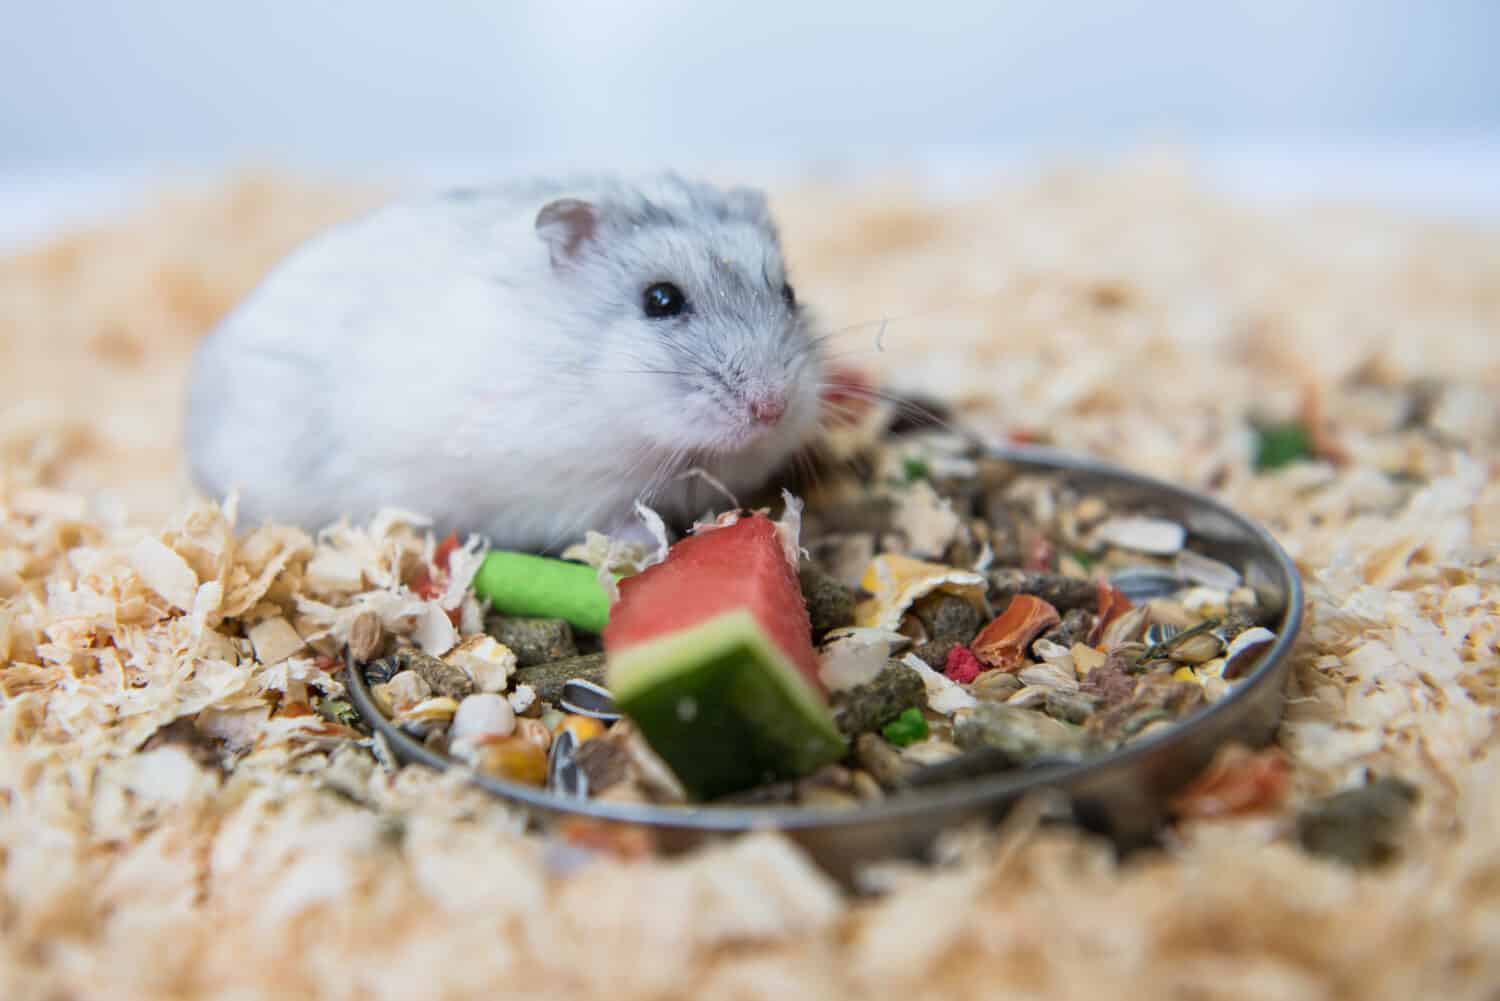 Djungarian hamster with a piece of watermelon